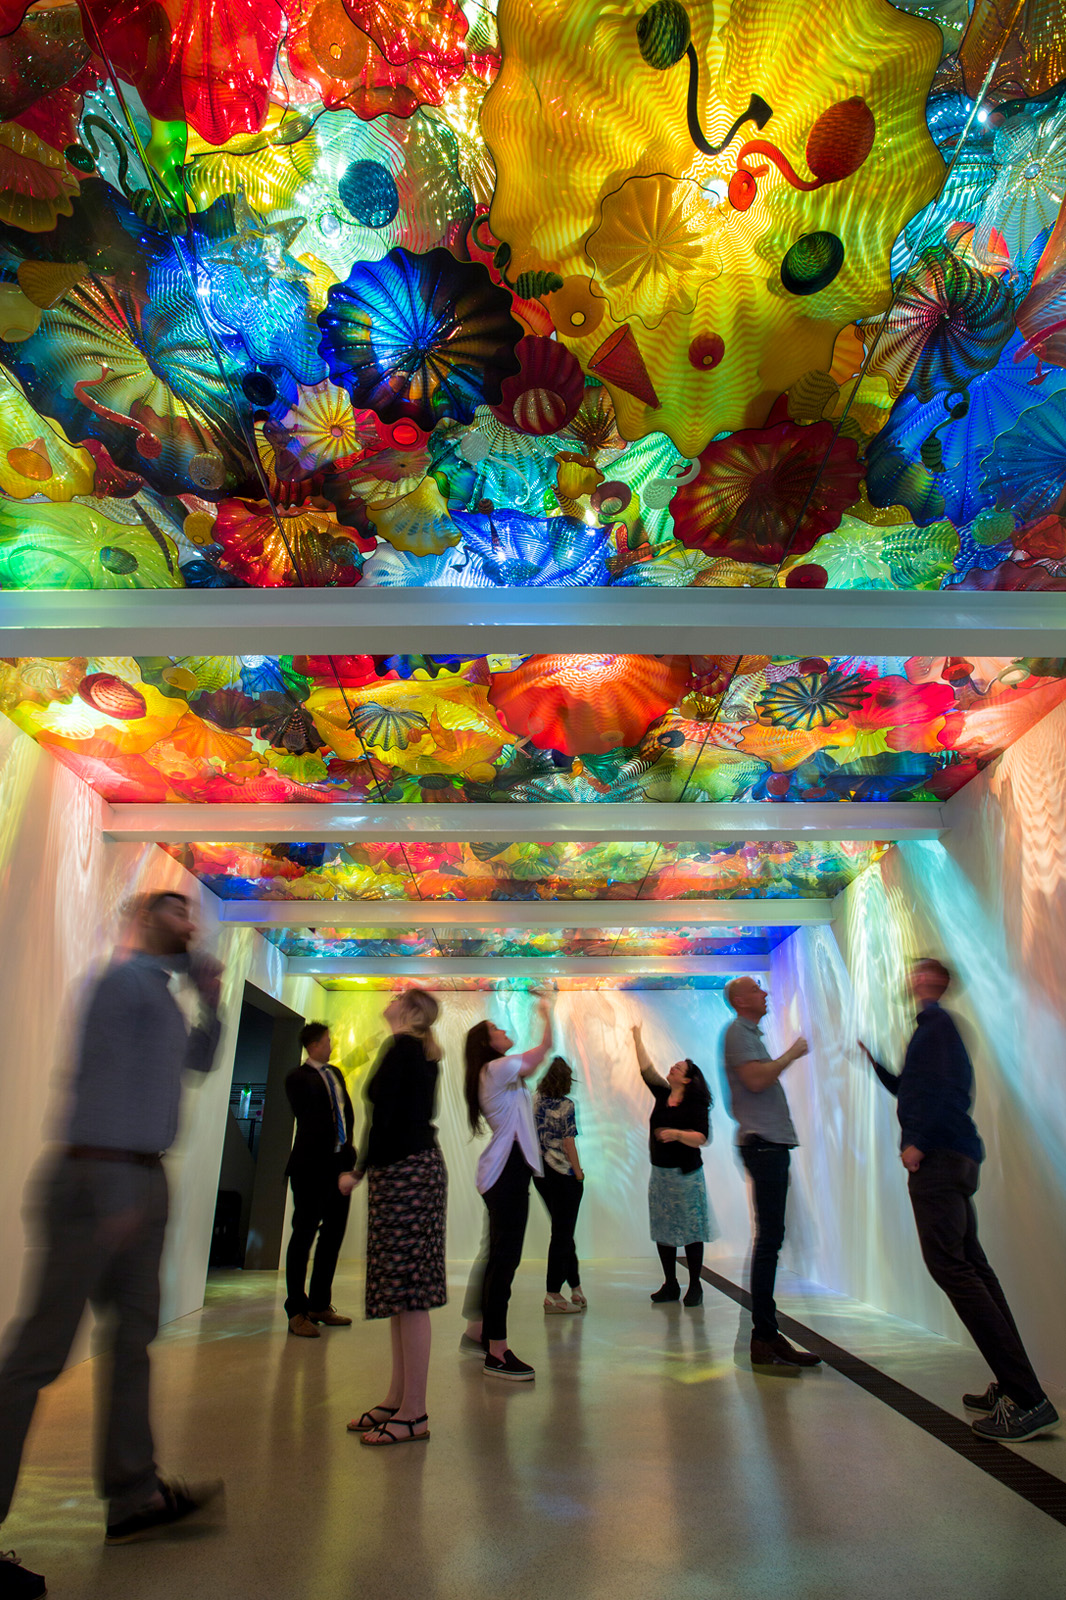 Dale Chihuly, Persian Ceiling, 2012